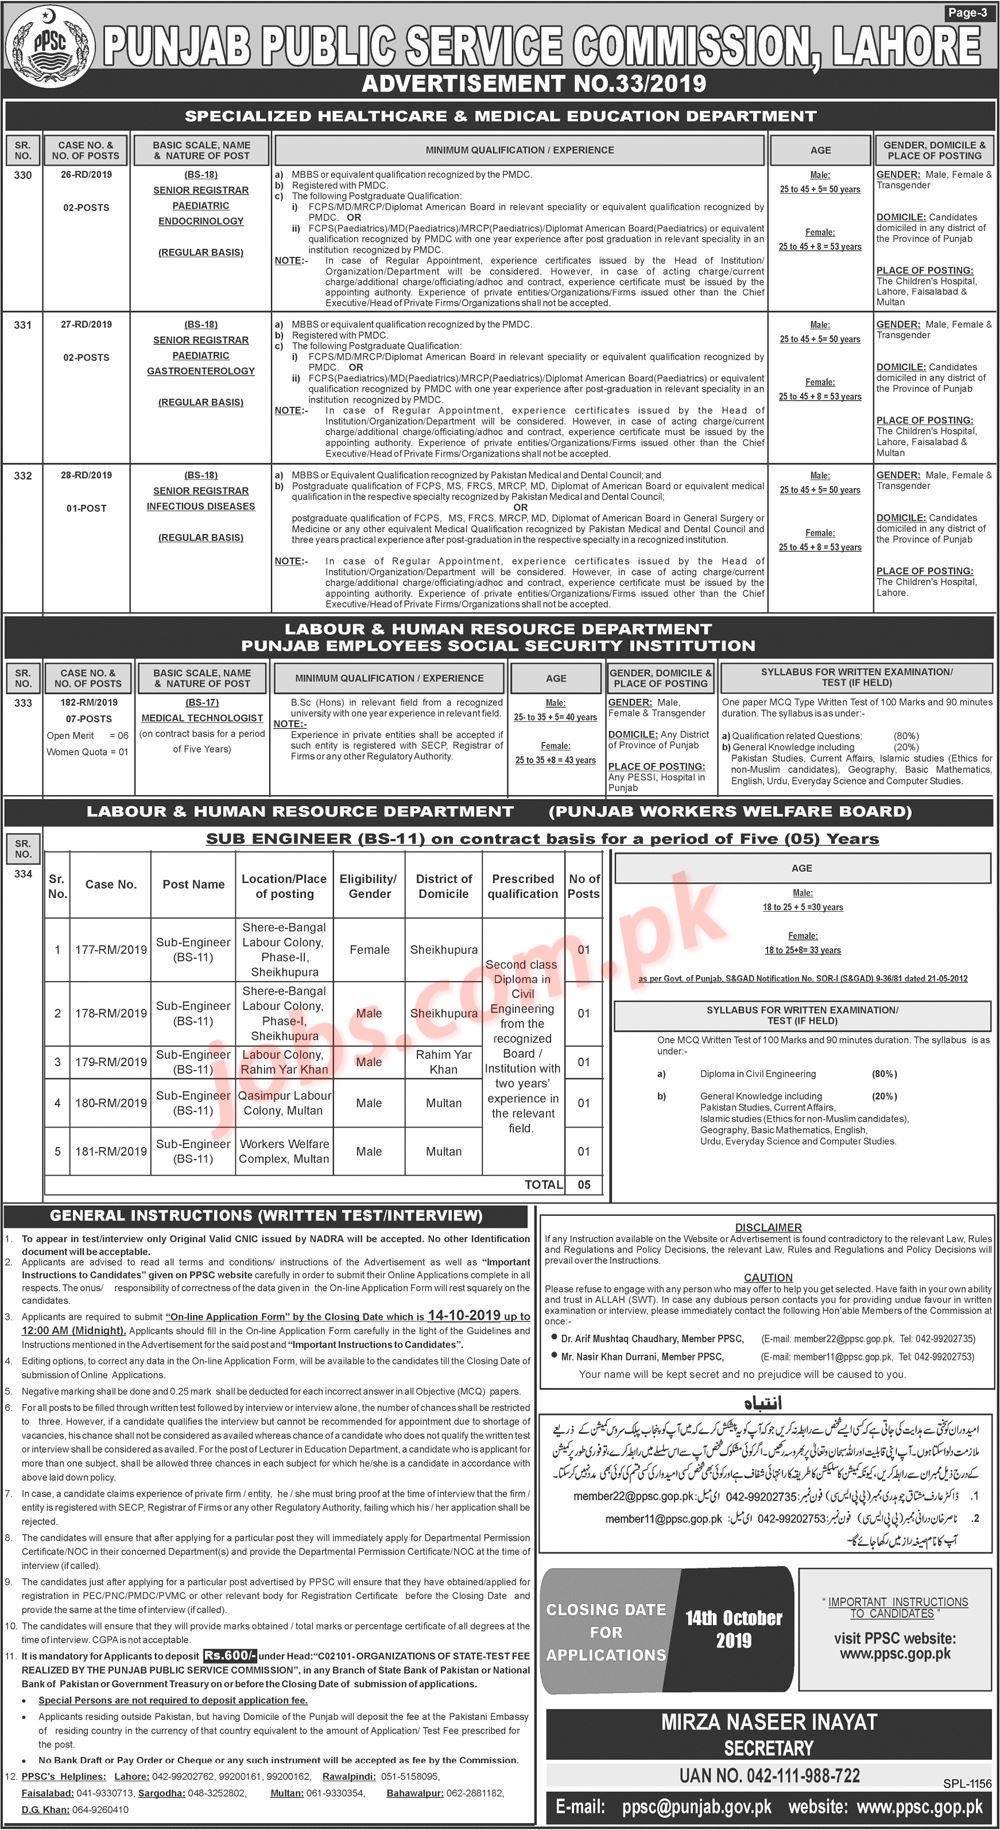 PPSC Jobs (33/2019): 840+ Educators, Sub-Engineers And Other Posts In Punjab Government